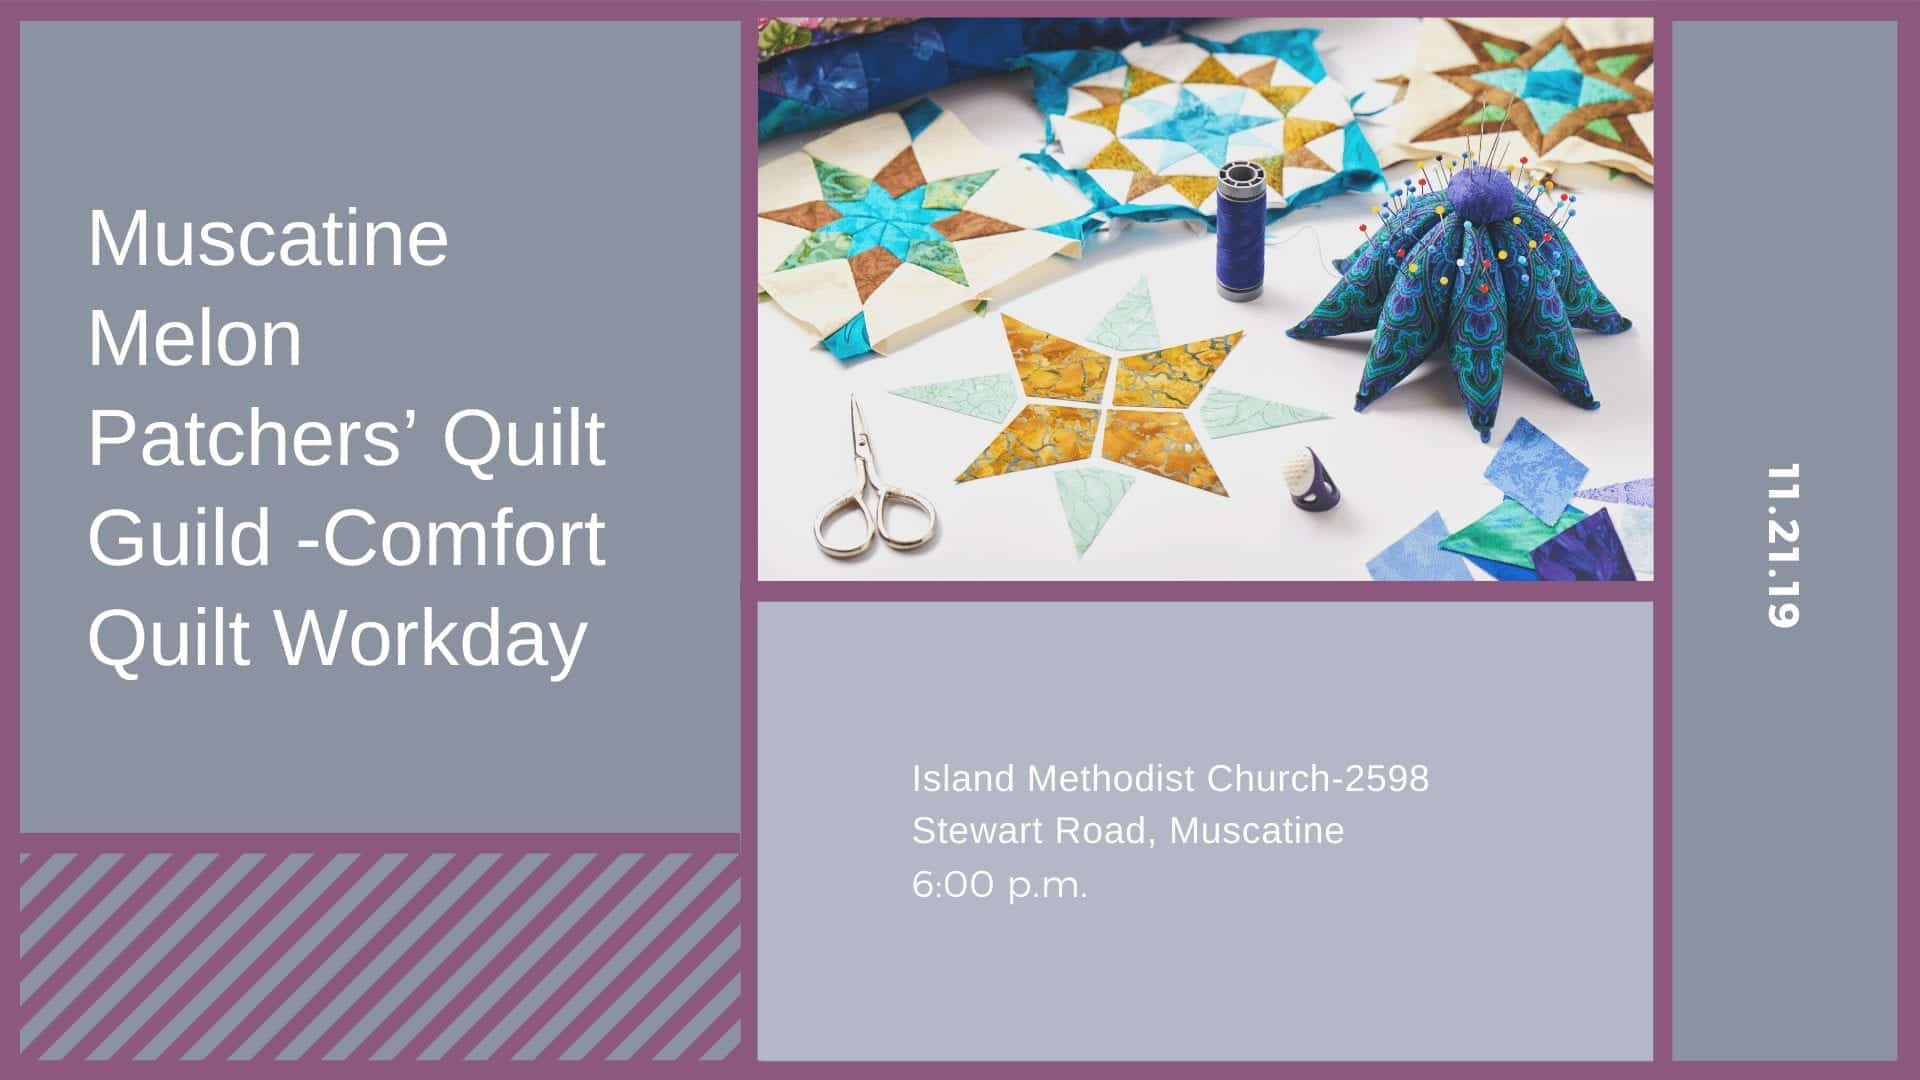 Muscatine Melon Patchers’ Quilt Guild -Comfort Quilt Workday